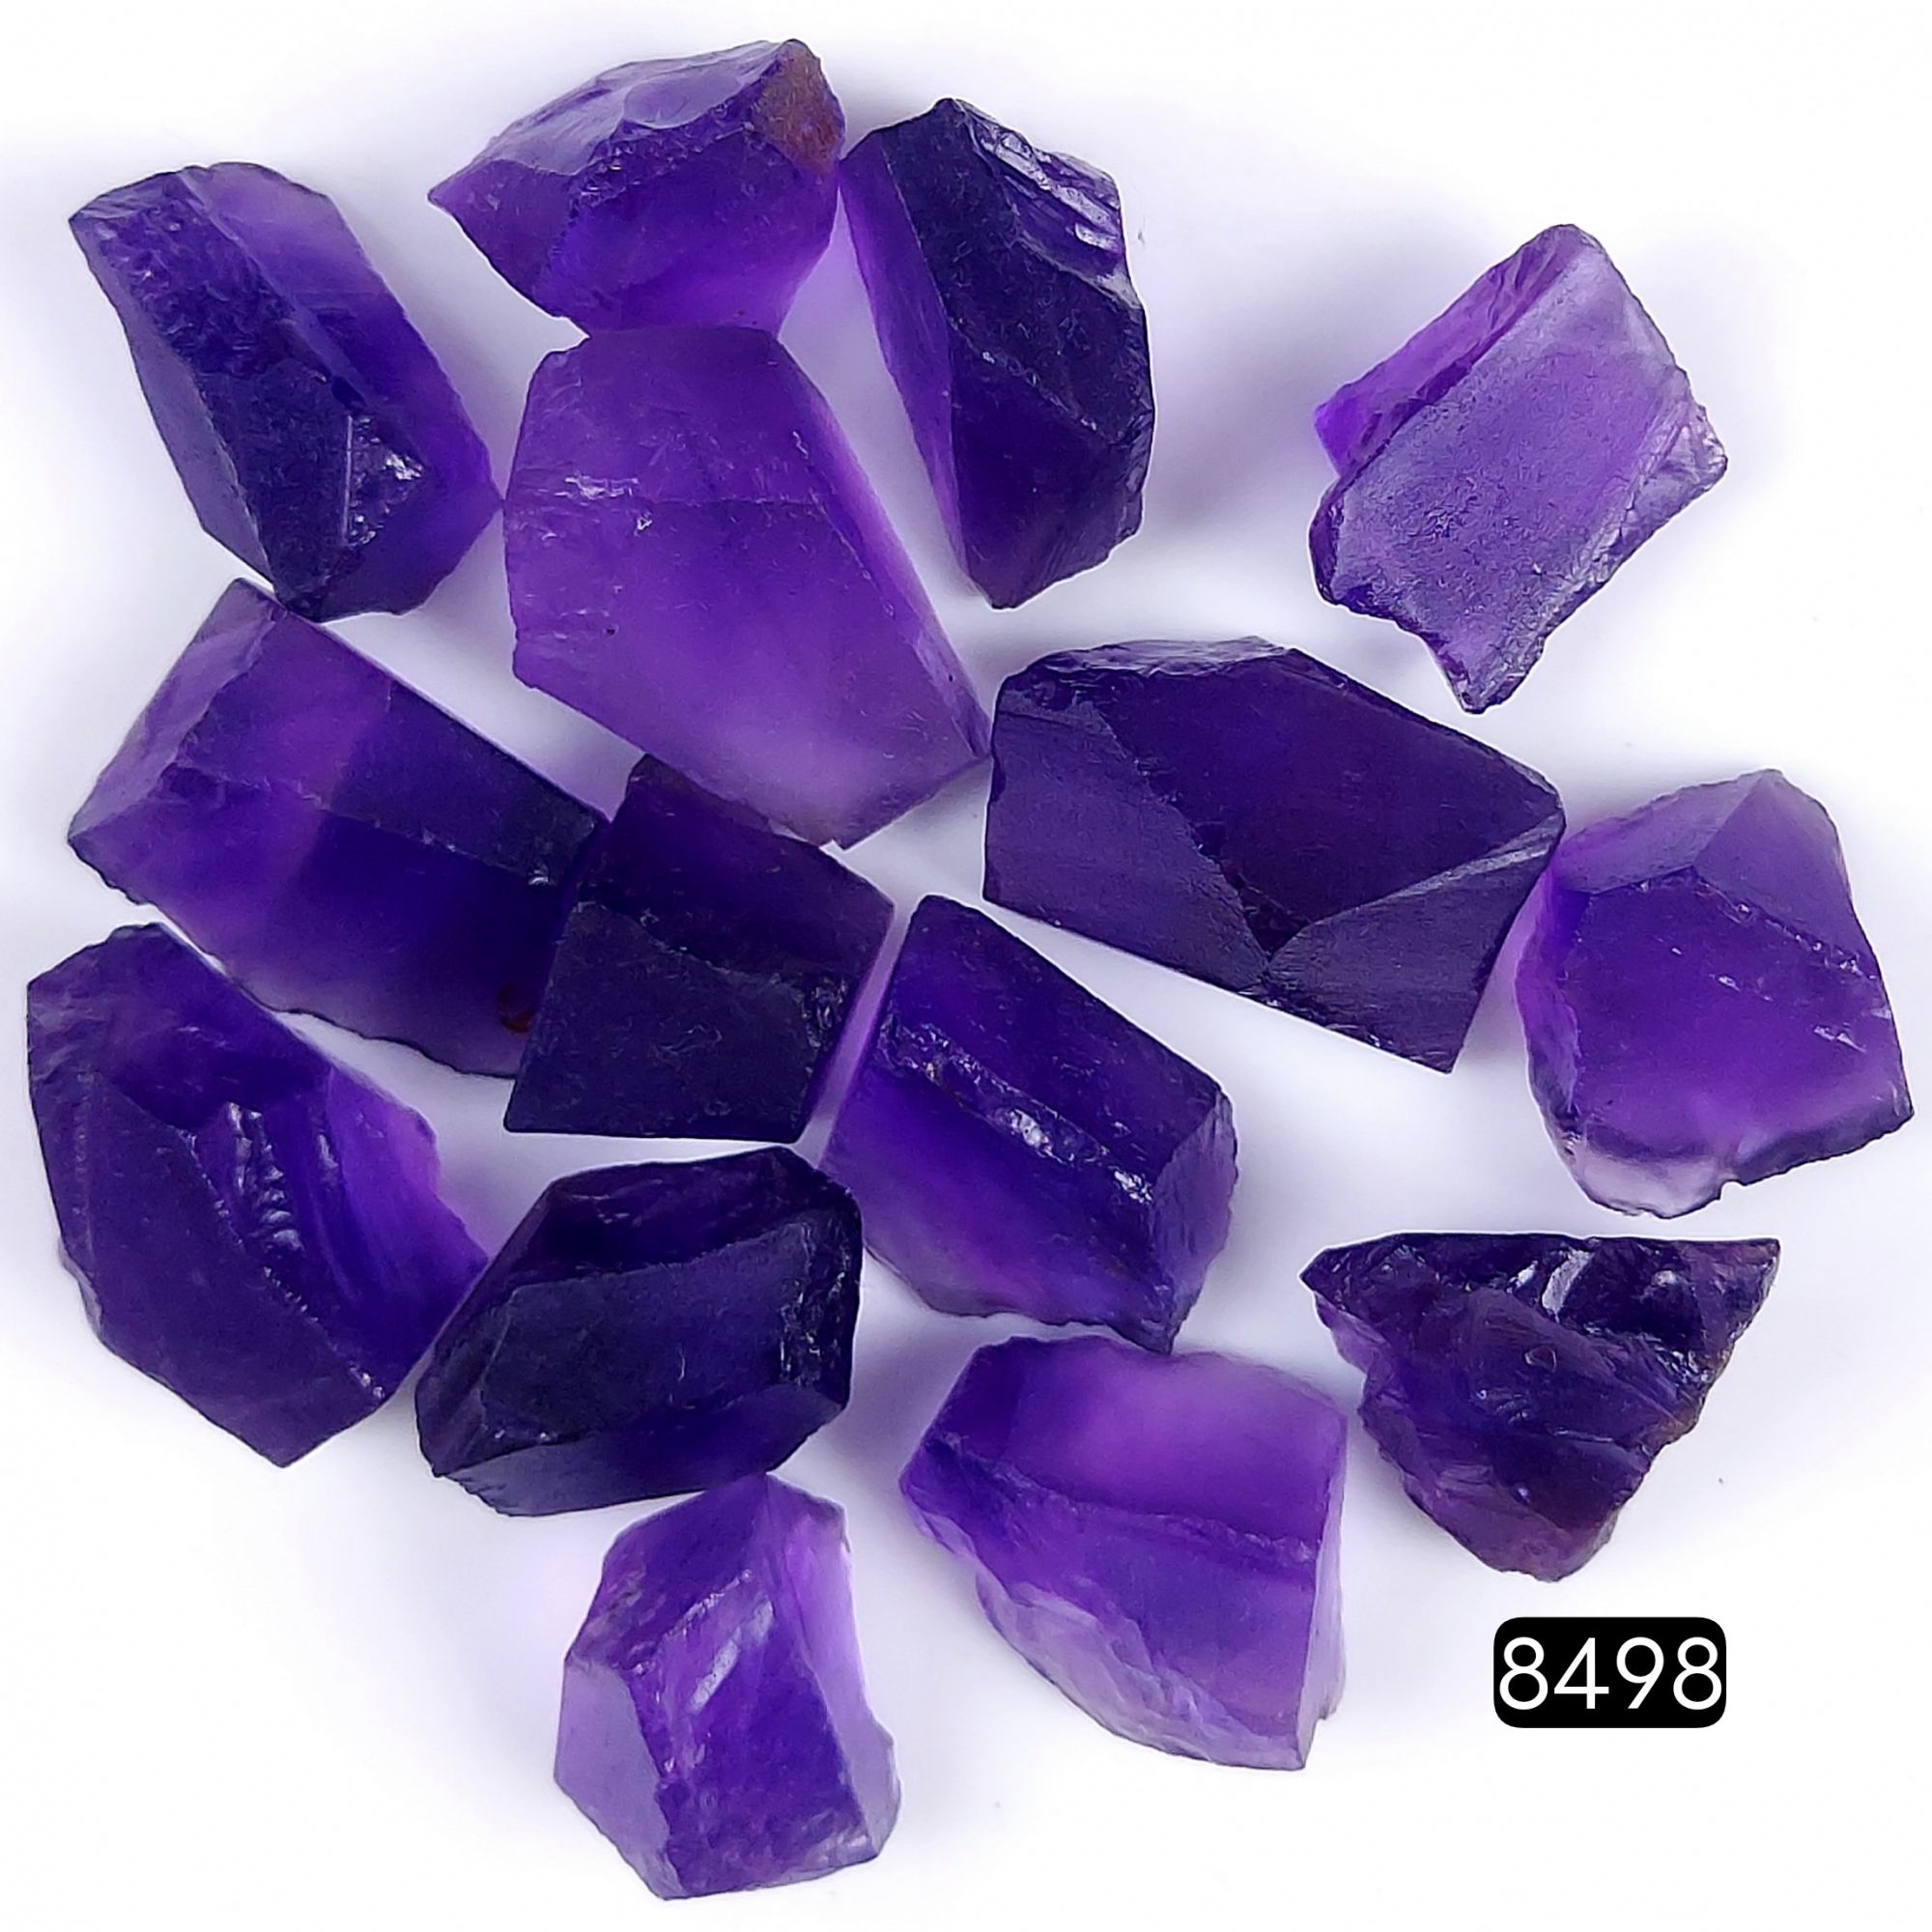 15Pcs 360Cts Natural Purple Raw Amethyst Rough Loose Gemstone Unpolished Uneven Size Handmade Jewelry Making Stone 21x11 13x10mm #8498